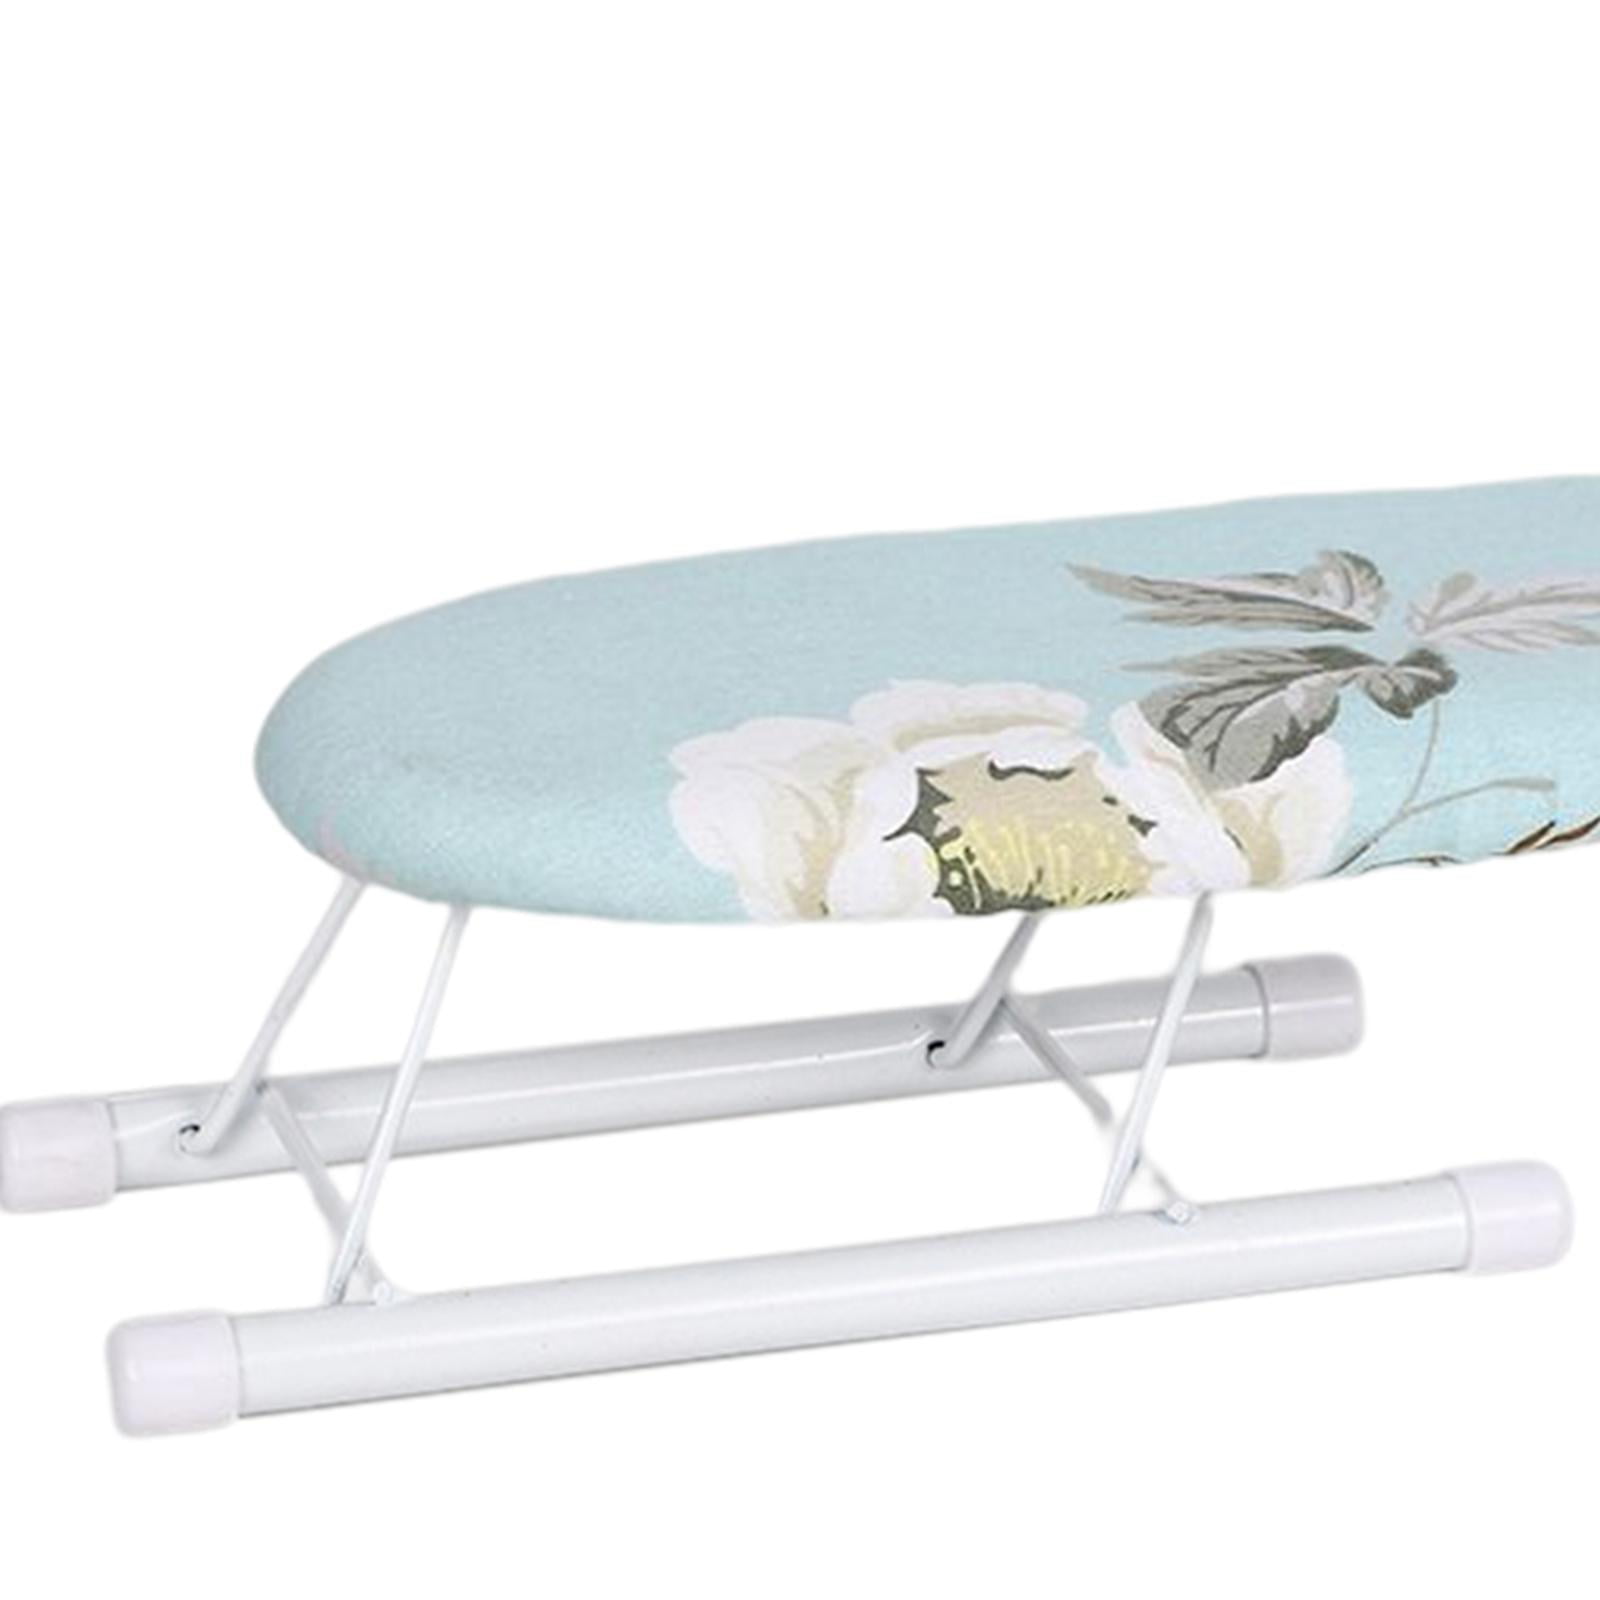  Veemoon 4 Pcs Ironing Boards Handheld Ironing Board Spray Starch  for Ironing Clothes Sleeve Ironing Board Table Top Ironing Board Protective  Ironing Pad Portable Mesh Cloth Protector : Home & Kitchen